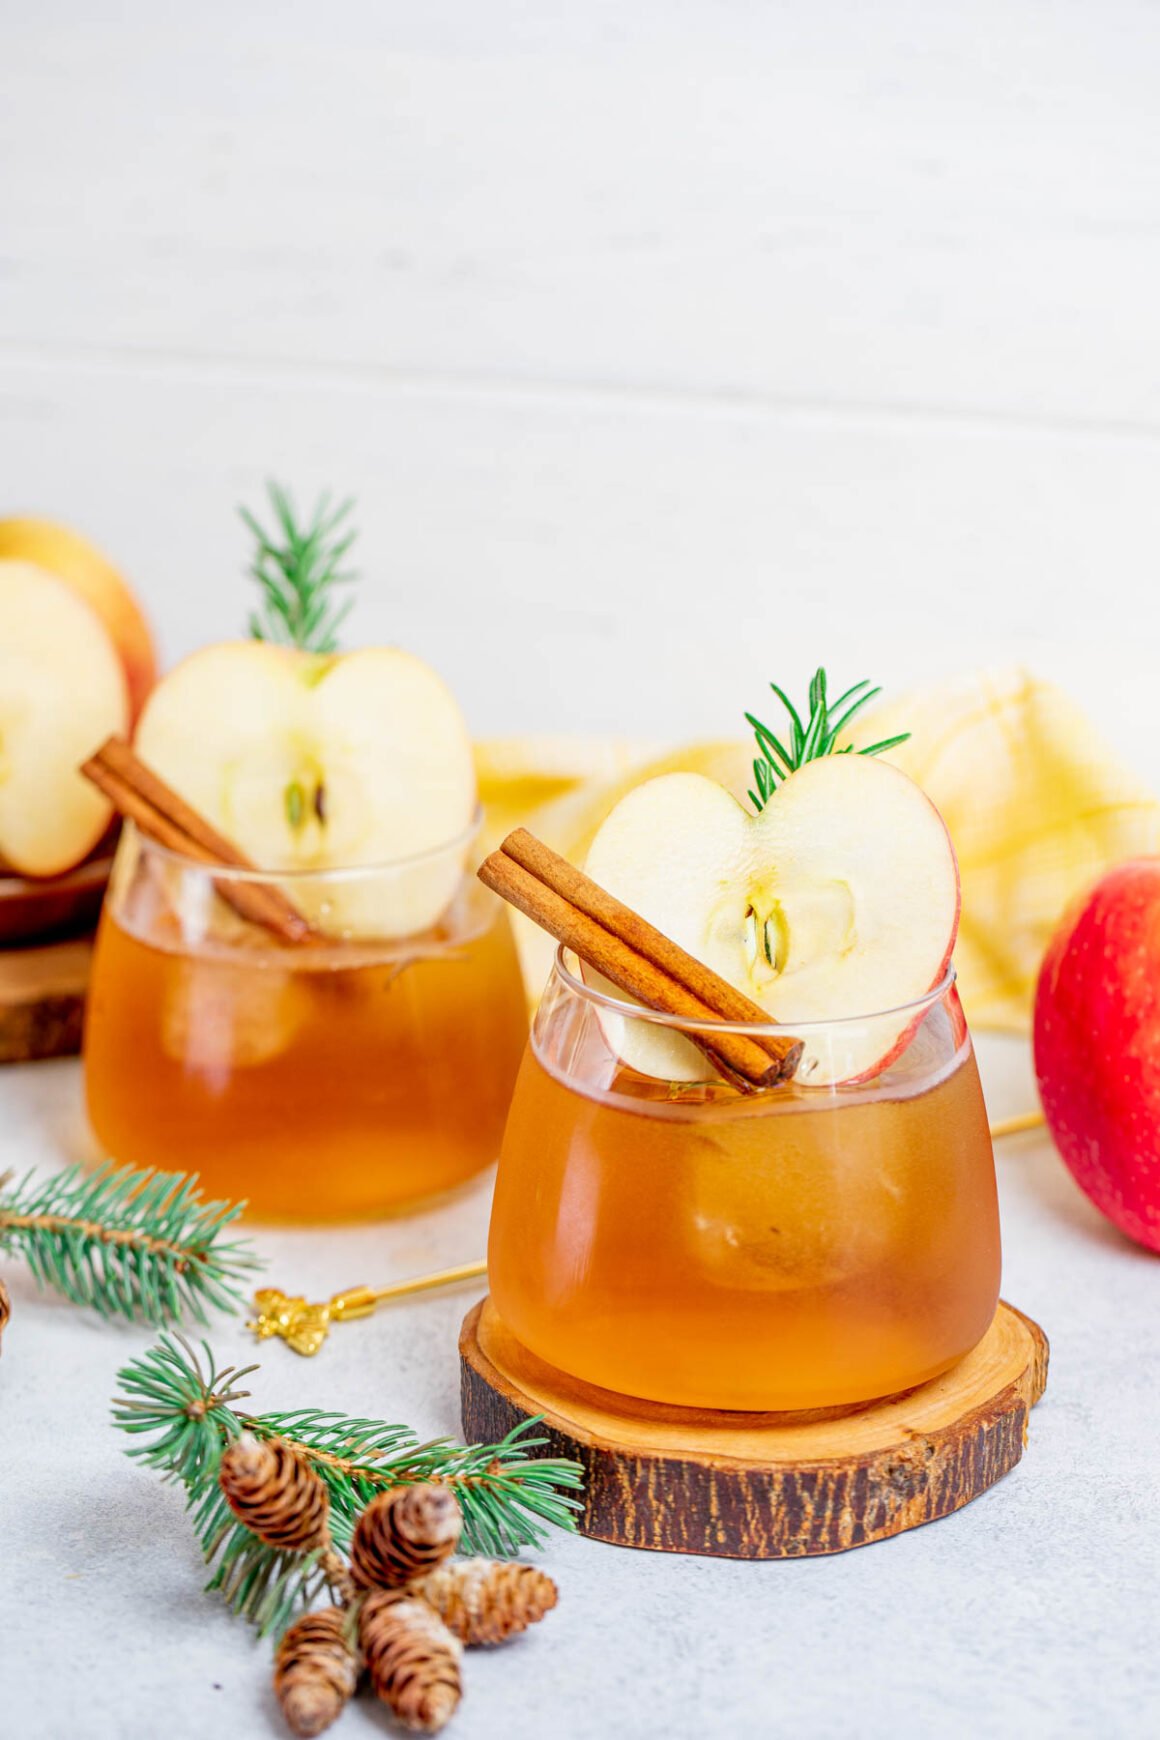 
With these delightful apple cider cocktail recipes, you can truly capture the essence of fall season.